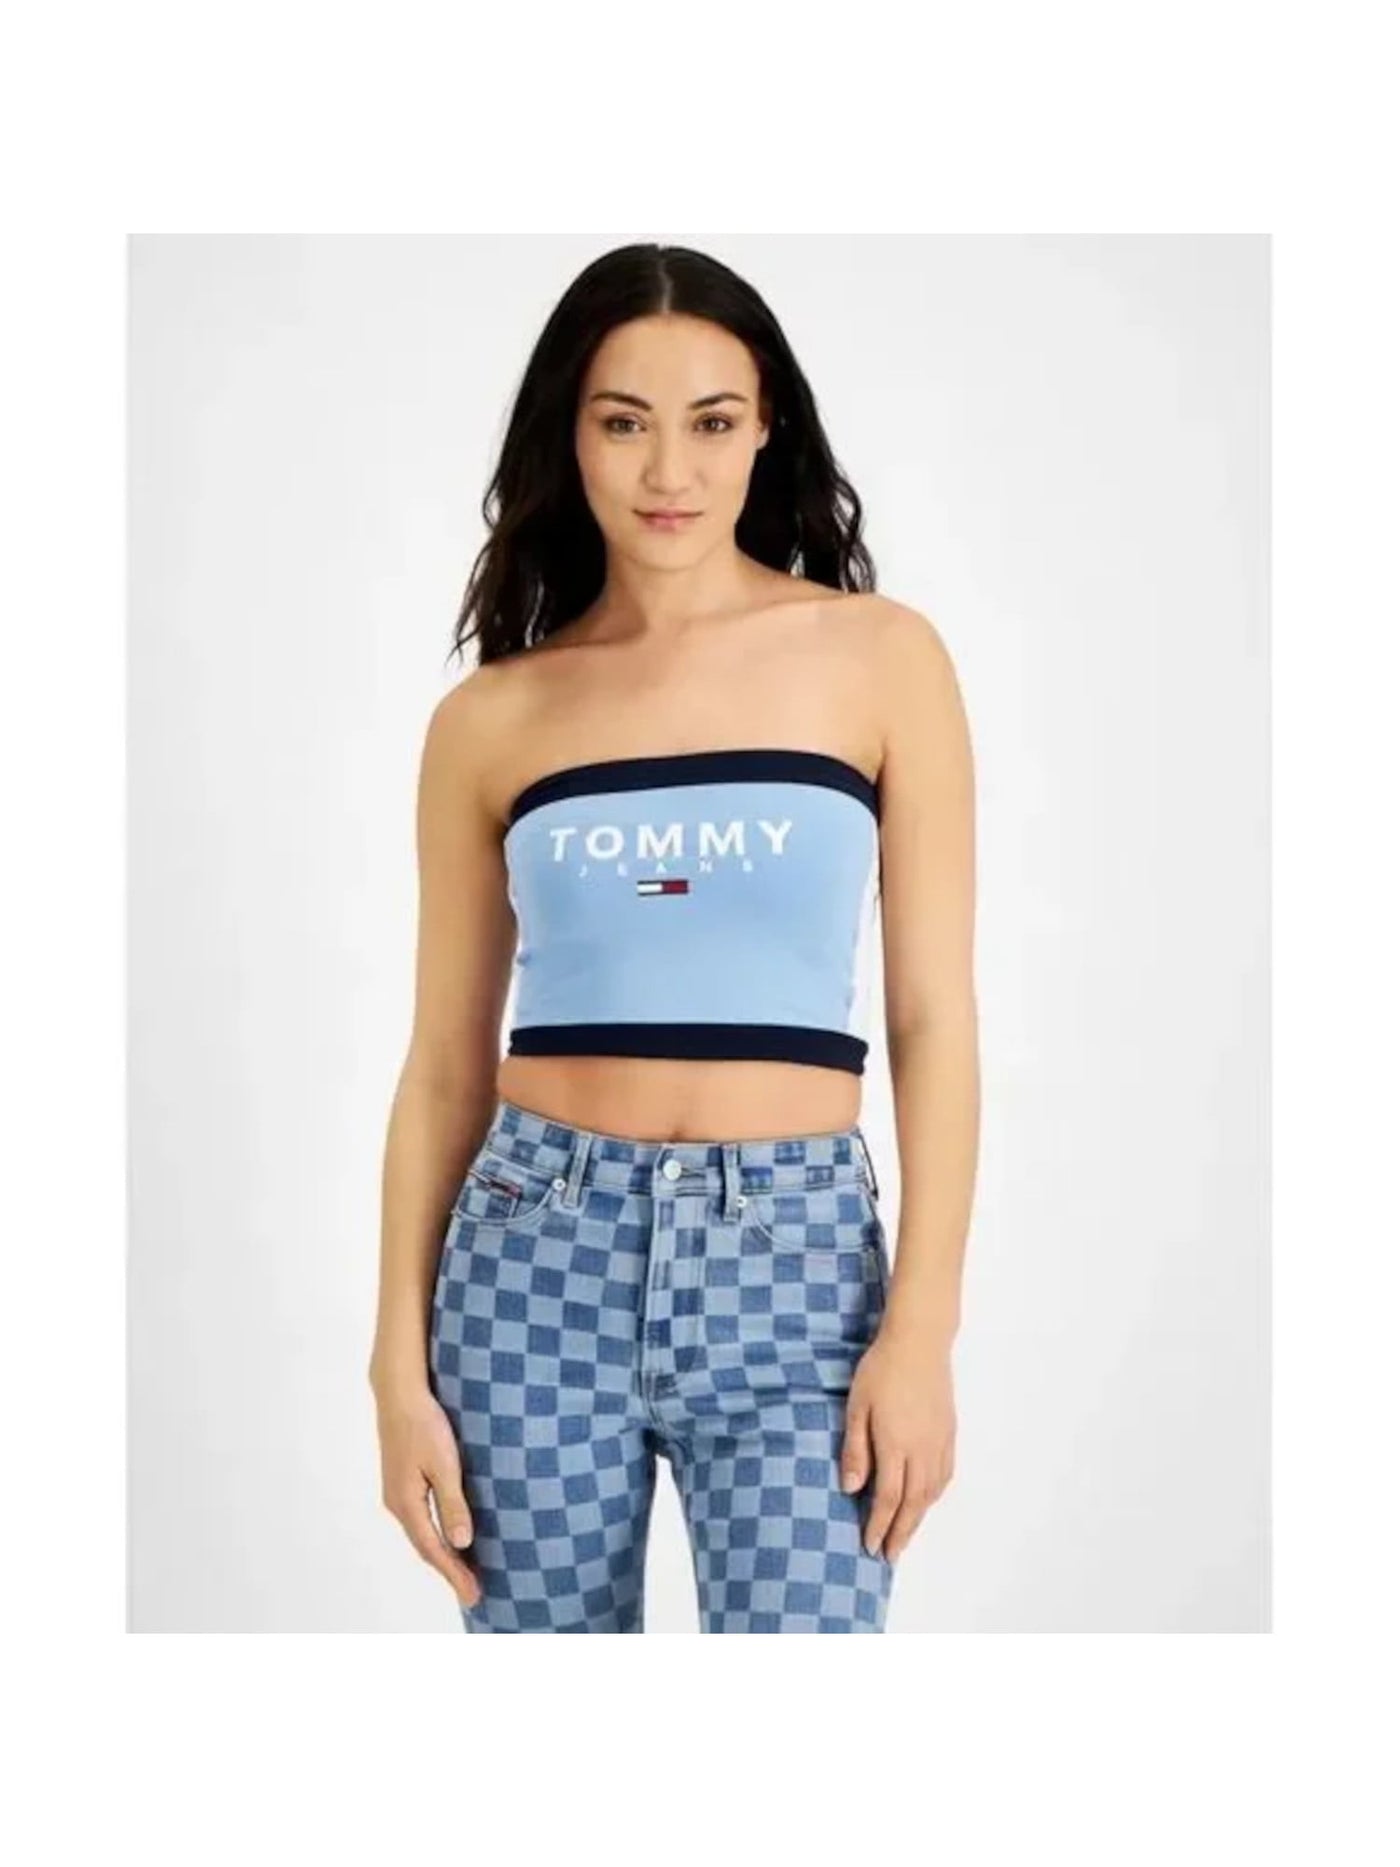 TOMMY JEANS Womens Light Blue Color Block Sleeveless Off Shoulder Crop Top XL